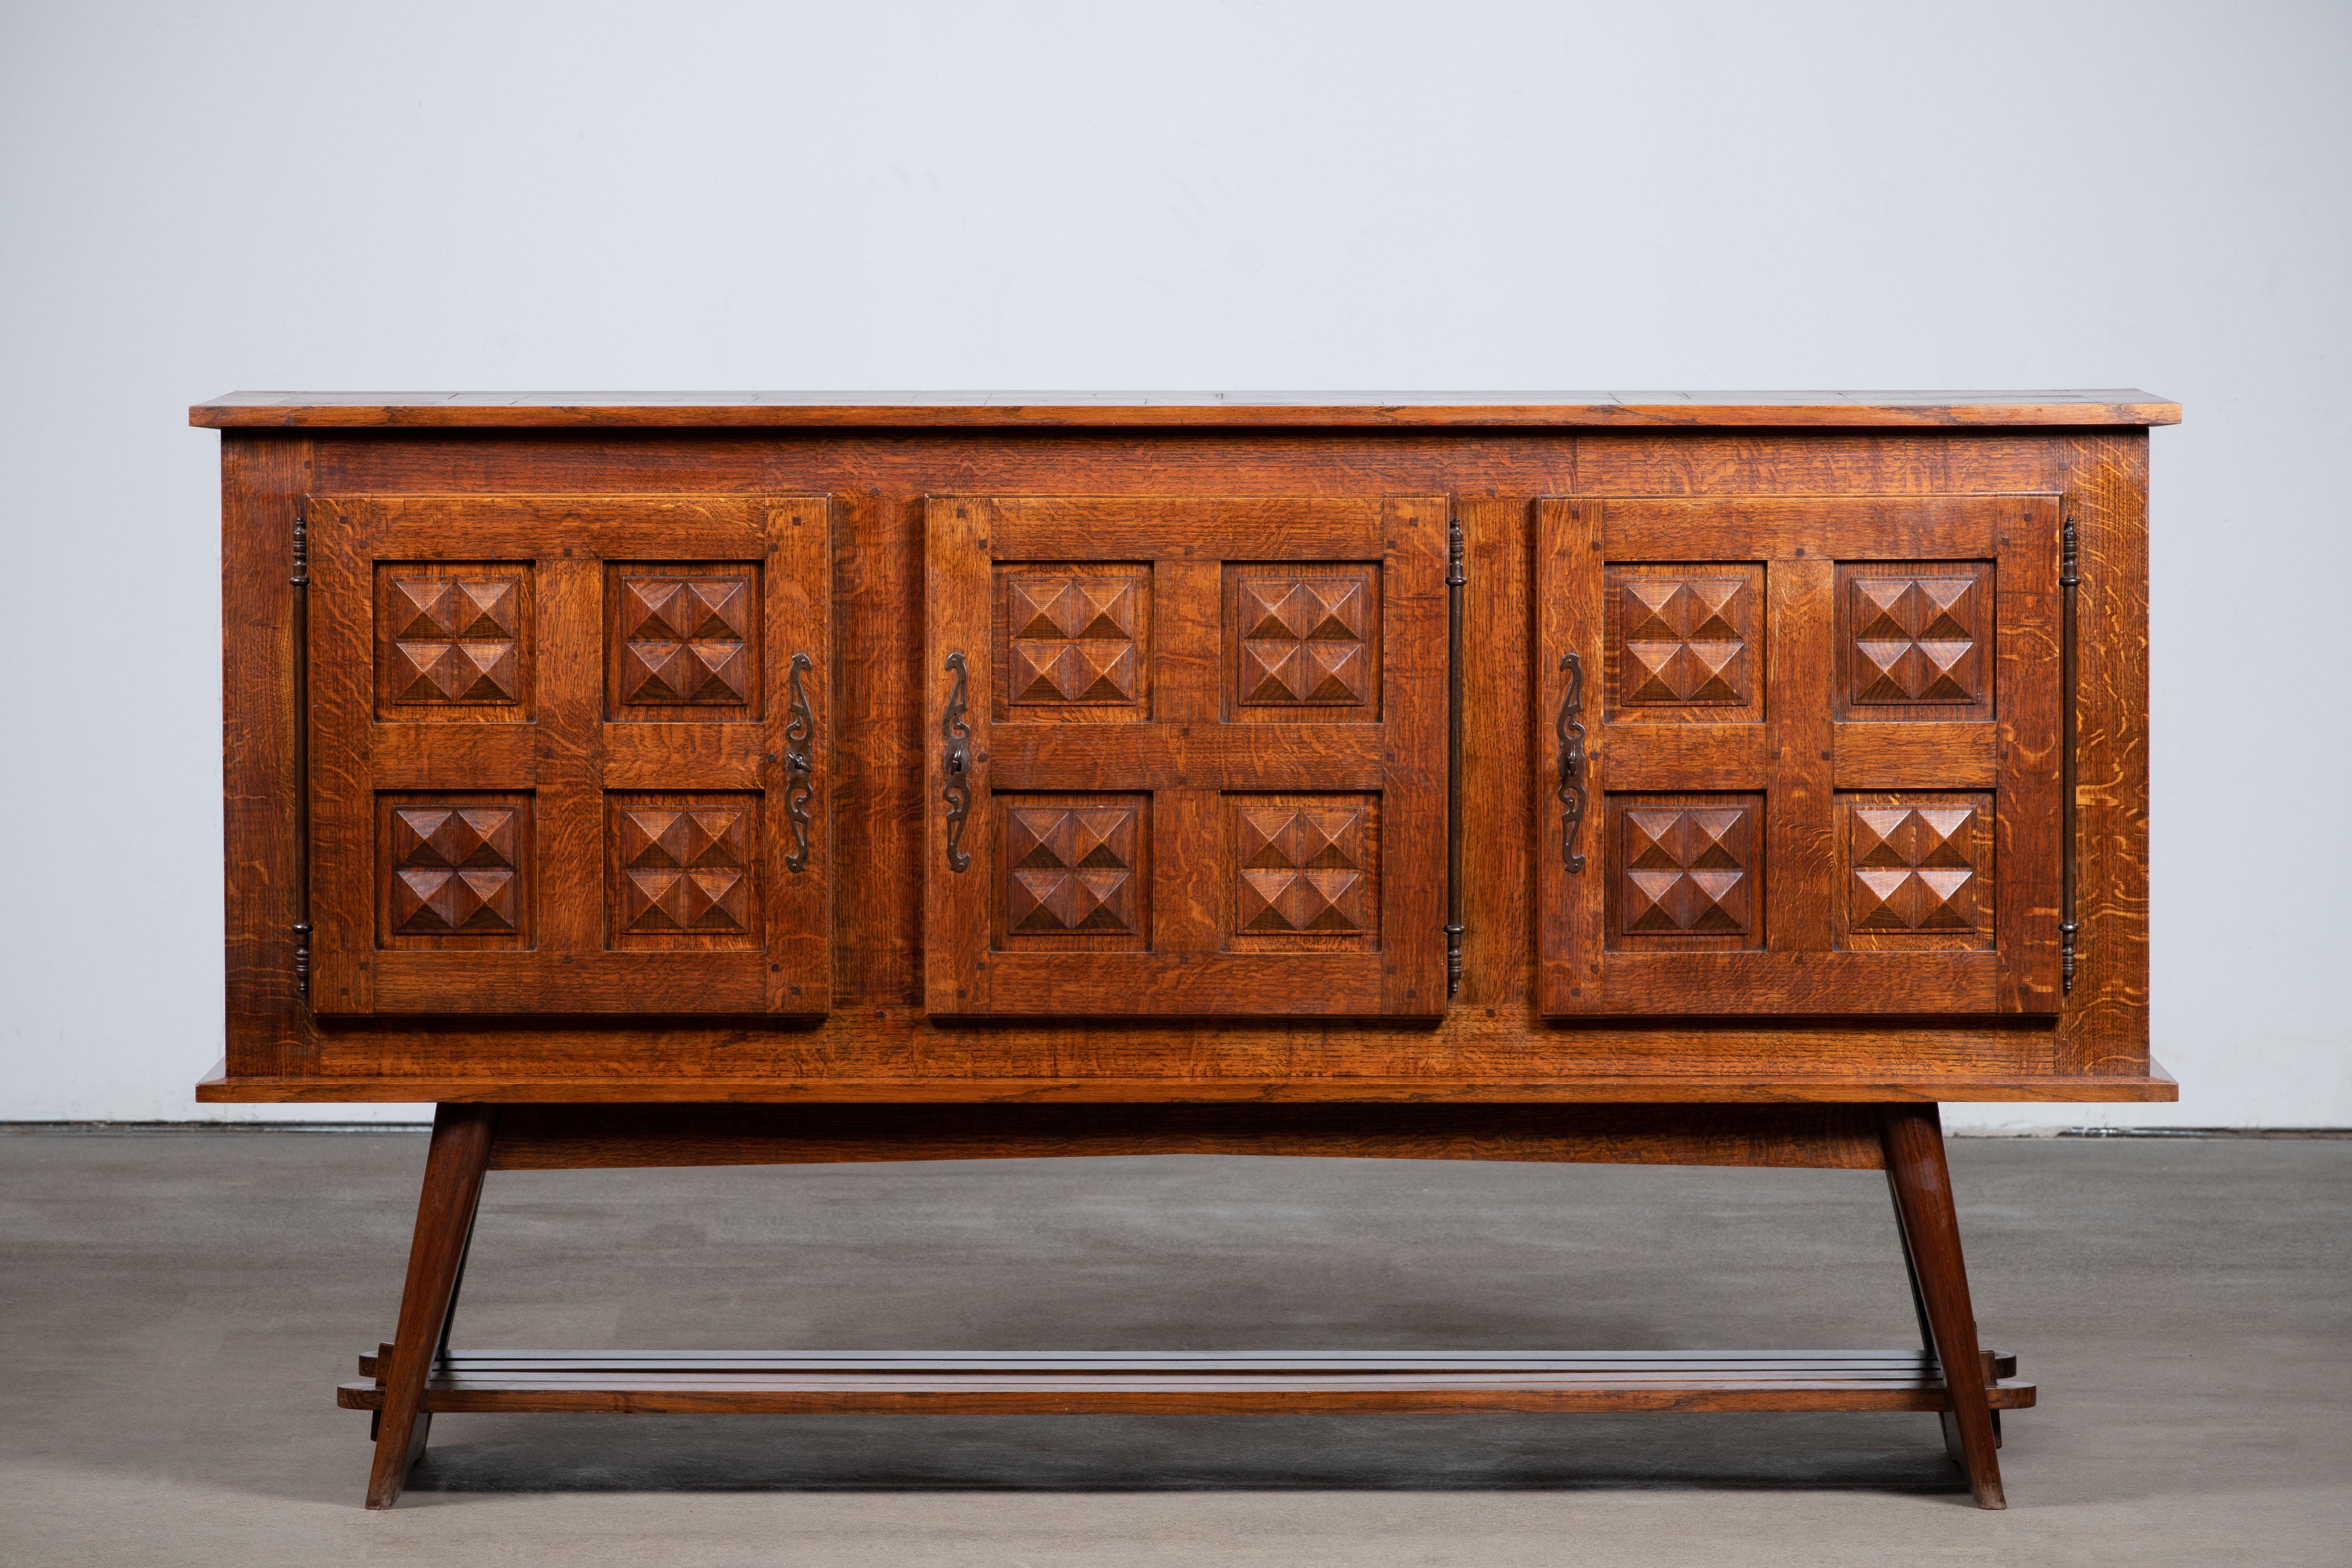 Constructivism Credenza, solid oak, France, 1940s.
Large Art Deco Brutalist sideboard. 
The credenza consists of tree storage facilities with shelves covered with very detailed designed door panels, a lower shelve 
A low slatted shelf completes